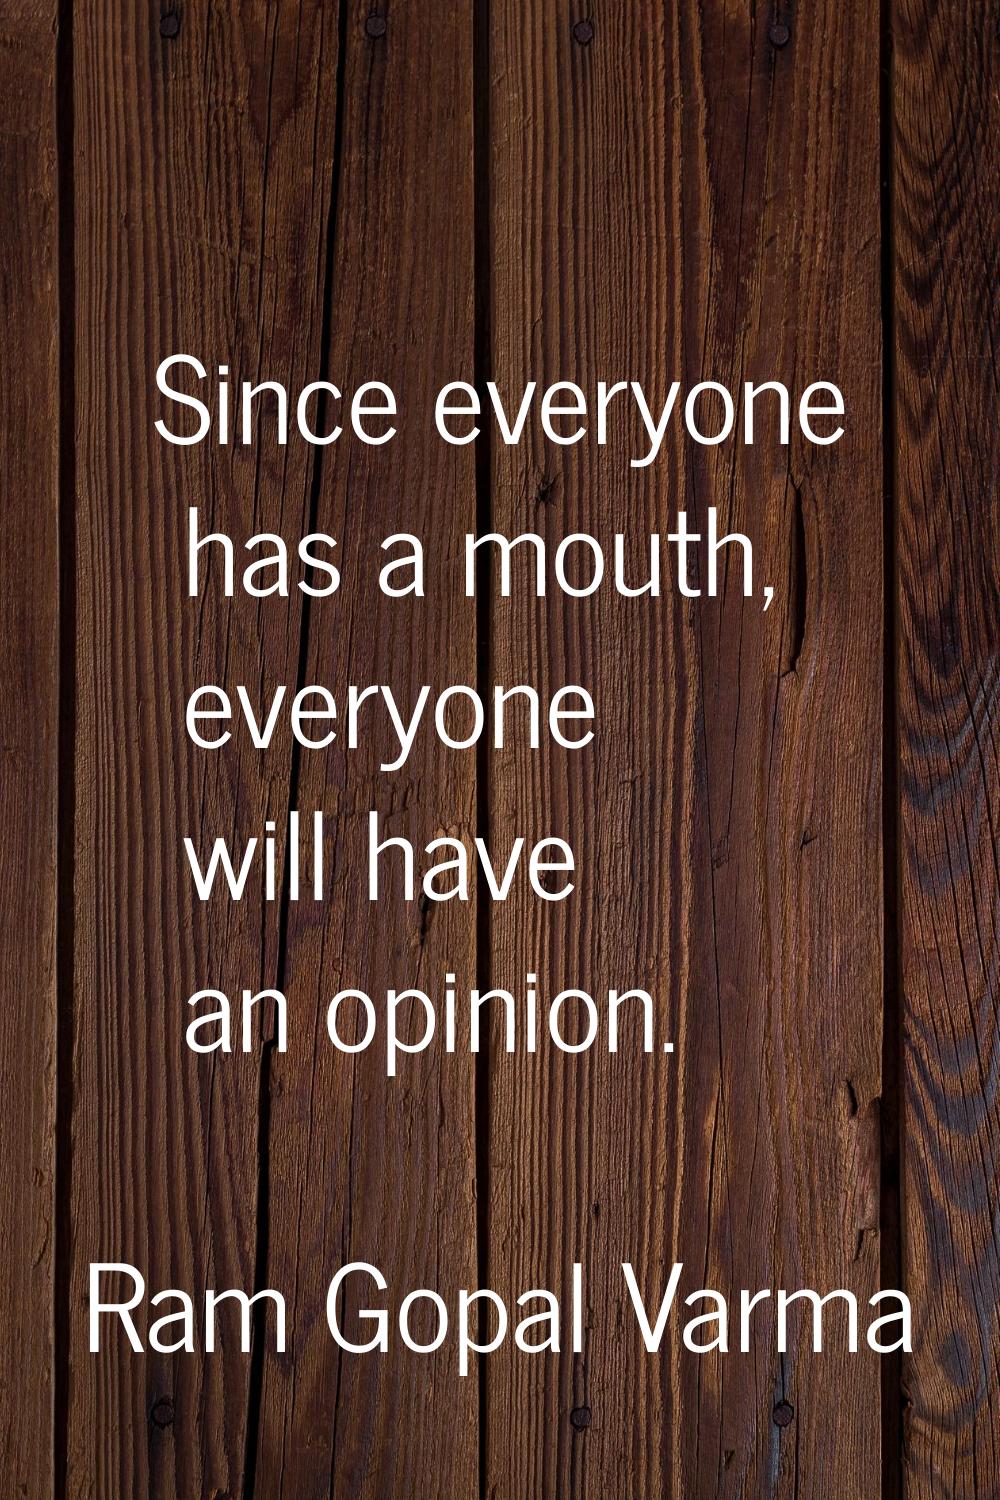 Since everyone has a mouth, everyone will have an opinion.